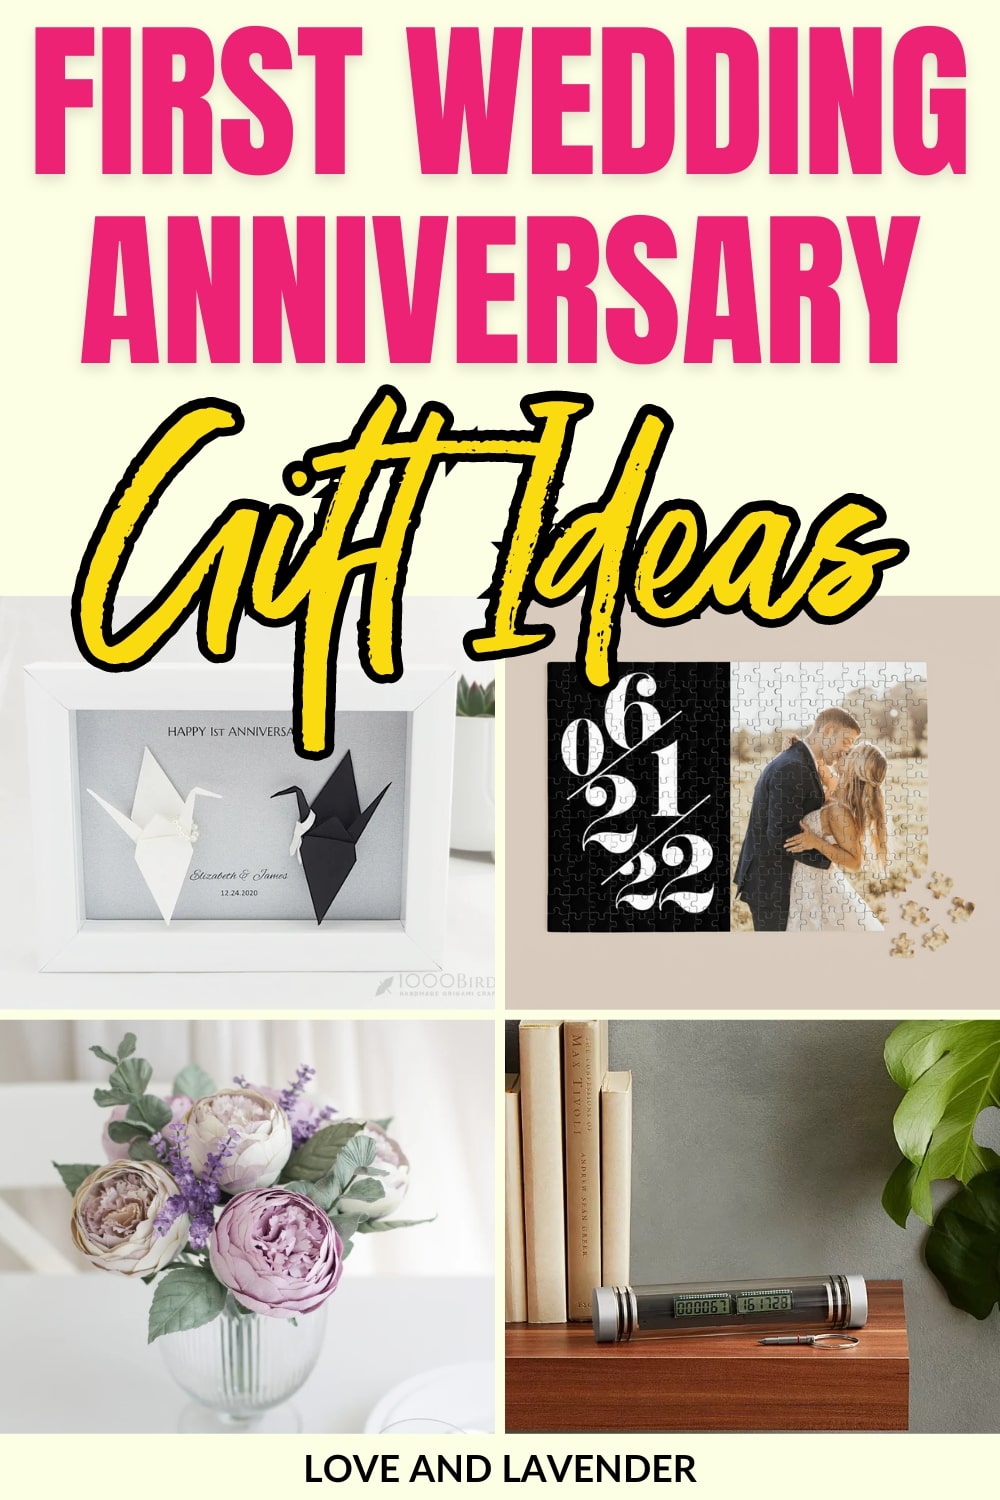 15 Paper Gifts for your First Wedding Anniversary